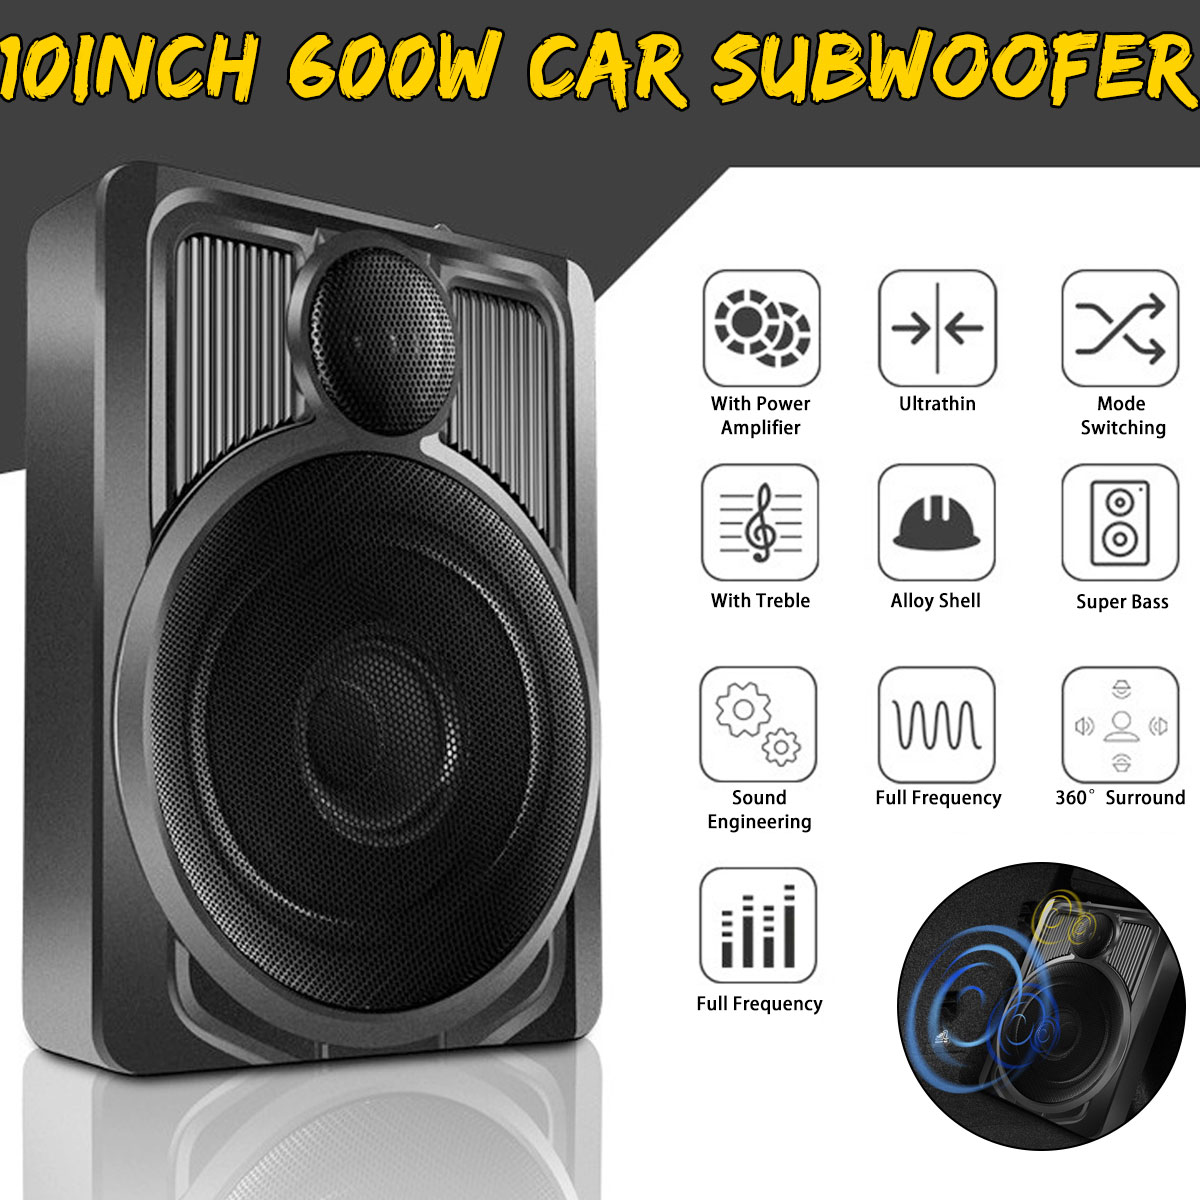 Bakeey-600W-Subwoofer-12V-Car-Ultra-thin-10-inch-With-Tweeter-Subwoofer-Dedicated-Full-range-Subwoof-1746877-1